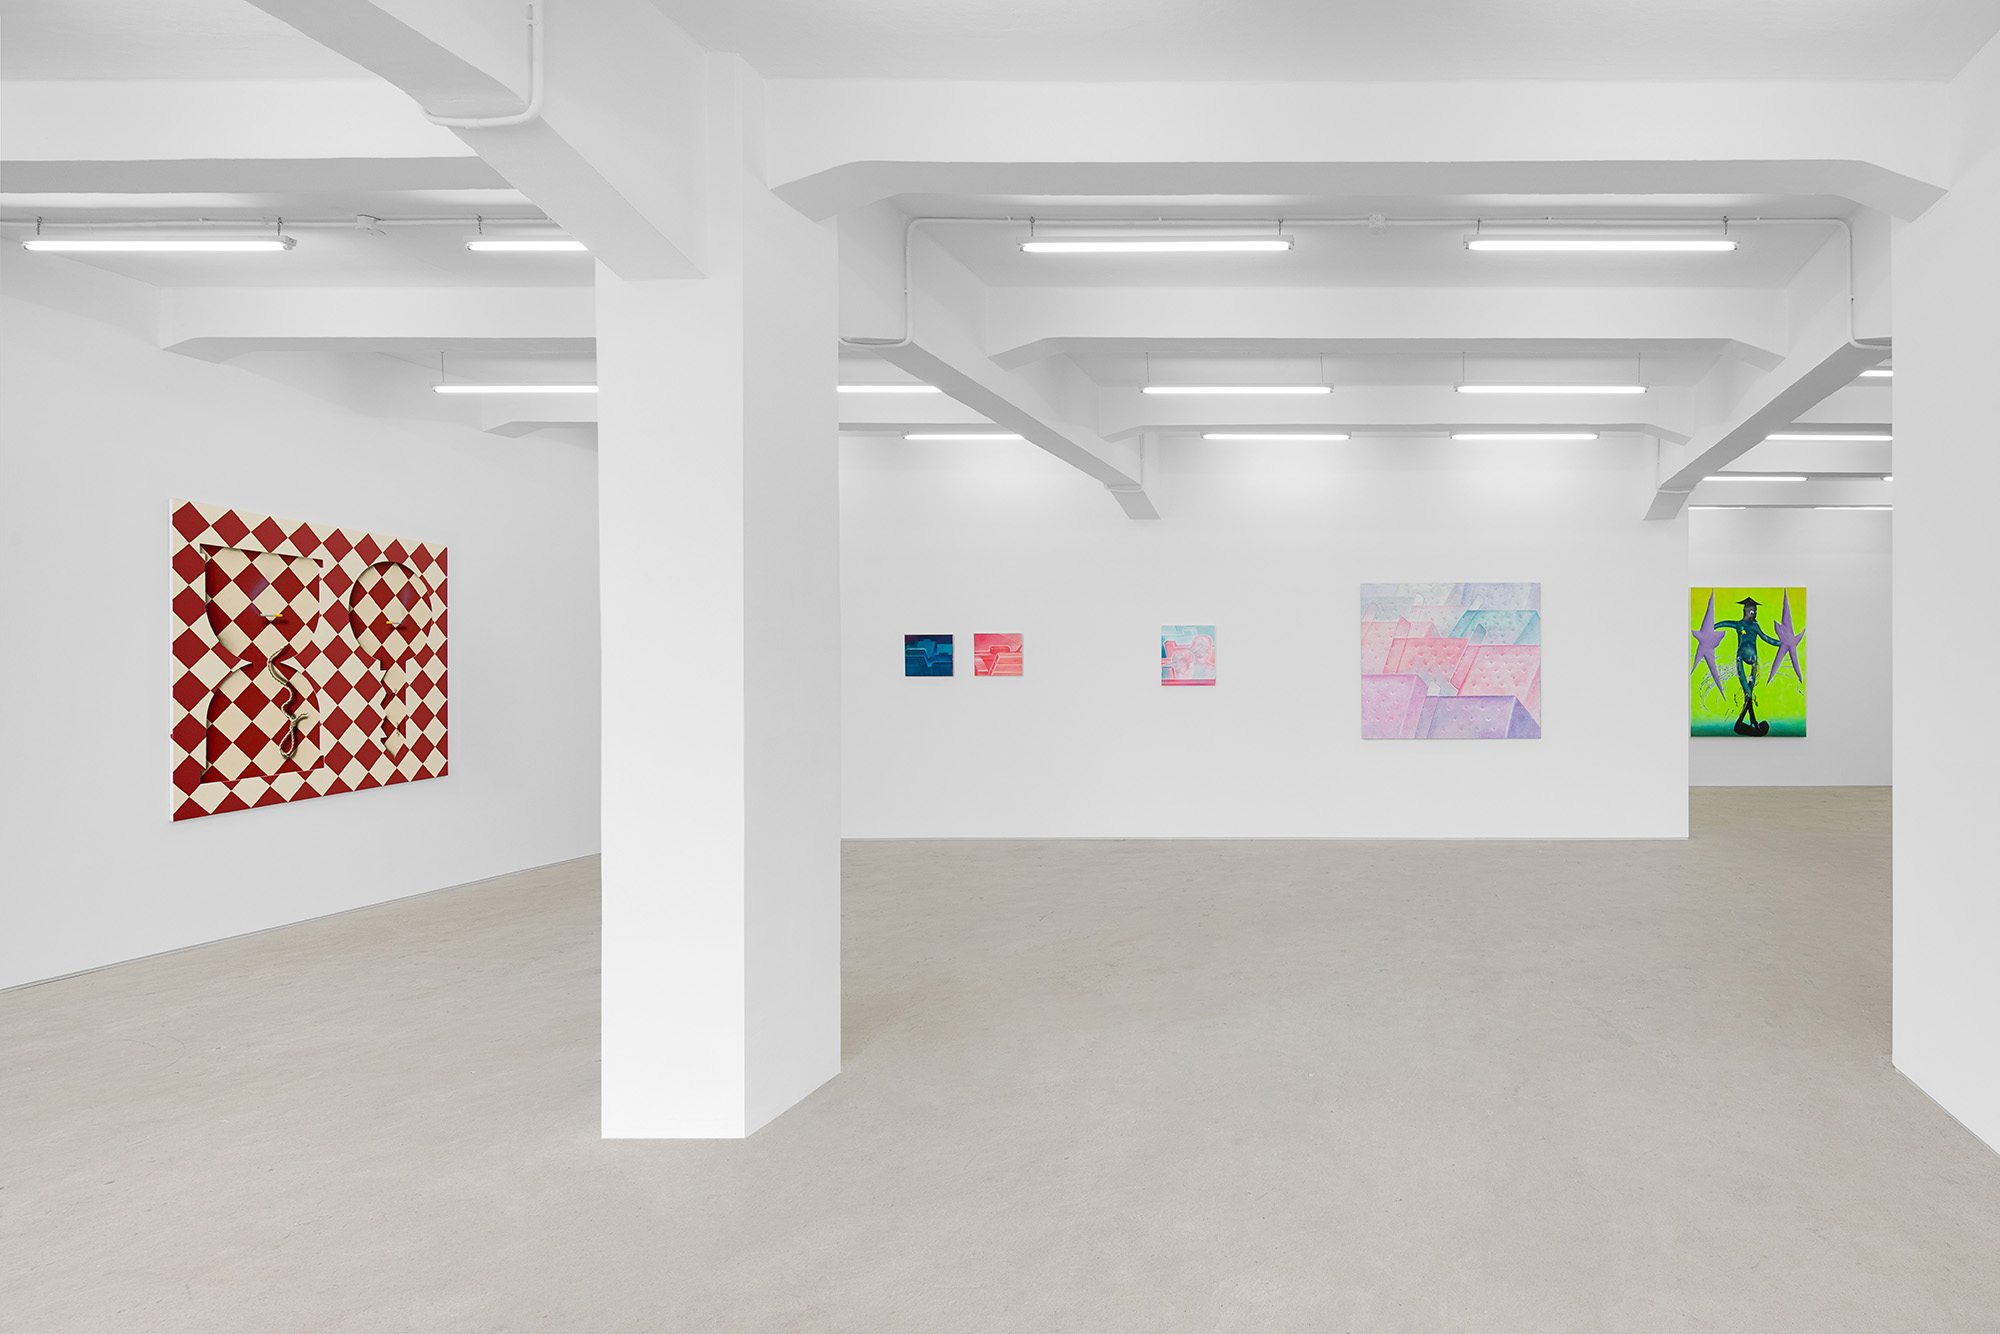 Installation view of group exhibition, Vacation II, at Gallery Vacancy, featuring works by Charline Tyberghein, Richard Burton, and Rao Weiyi.